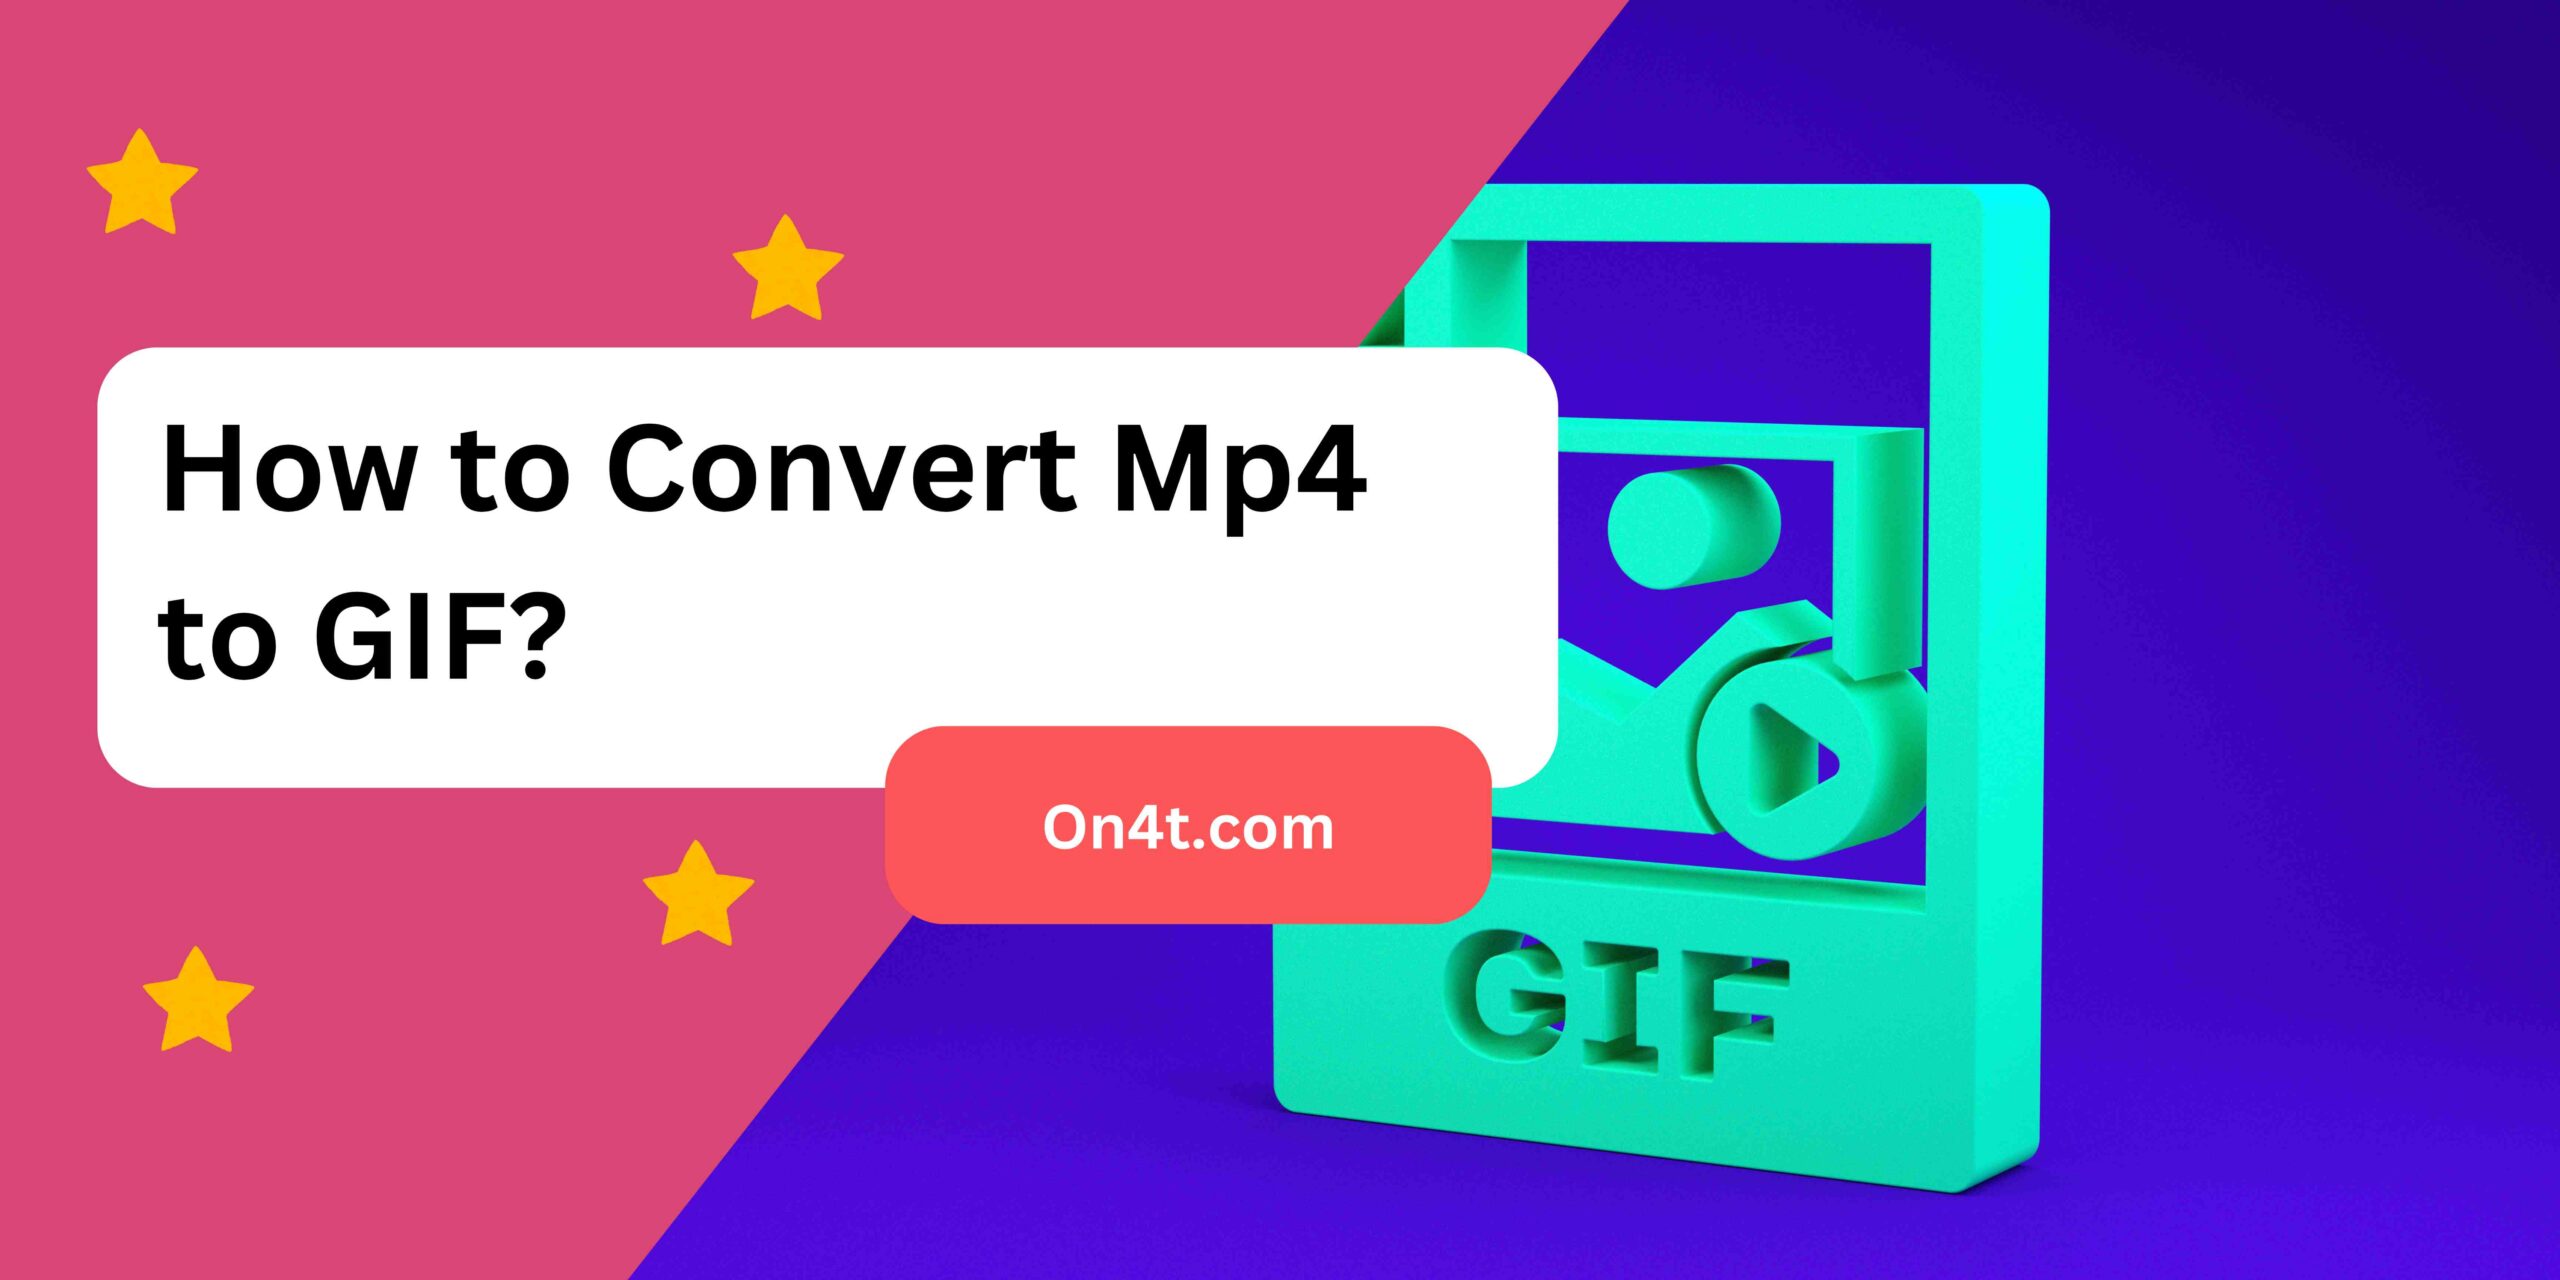 How to Convert Mp4 to GIF?